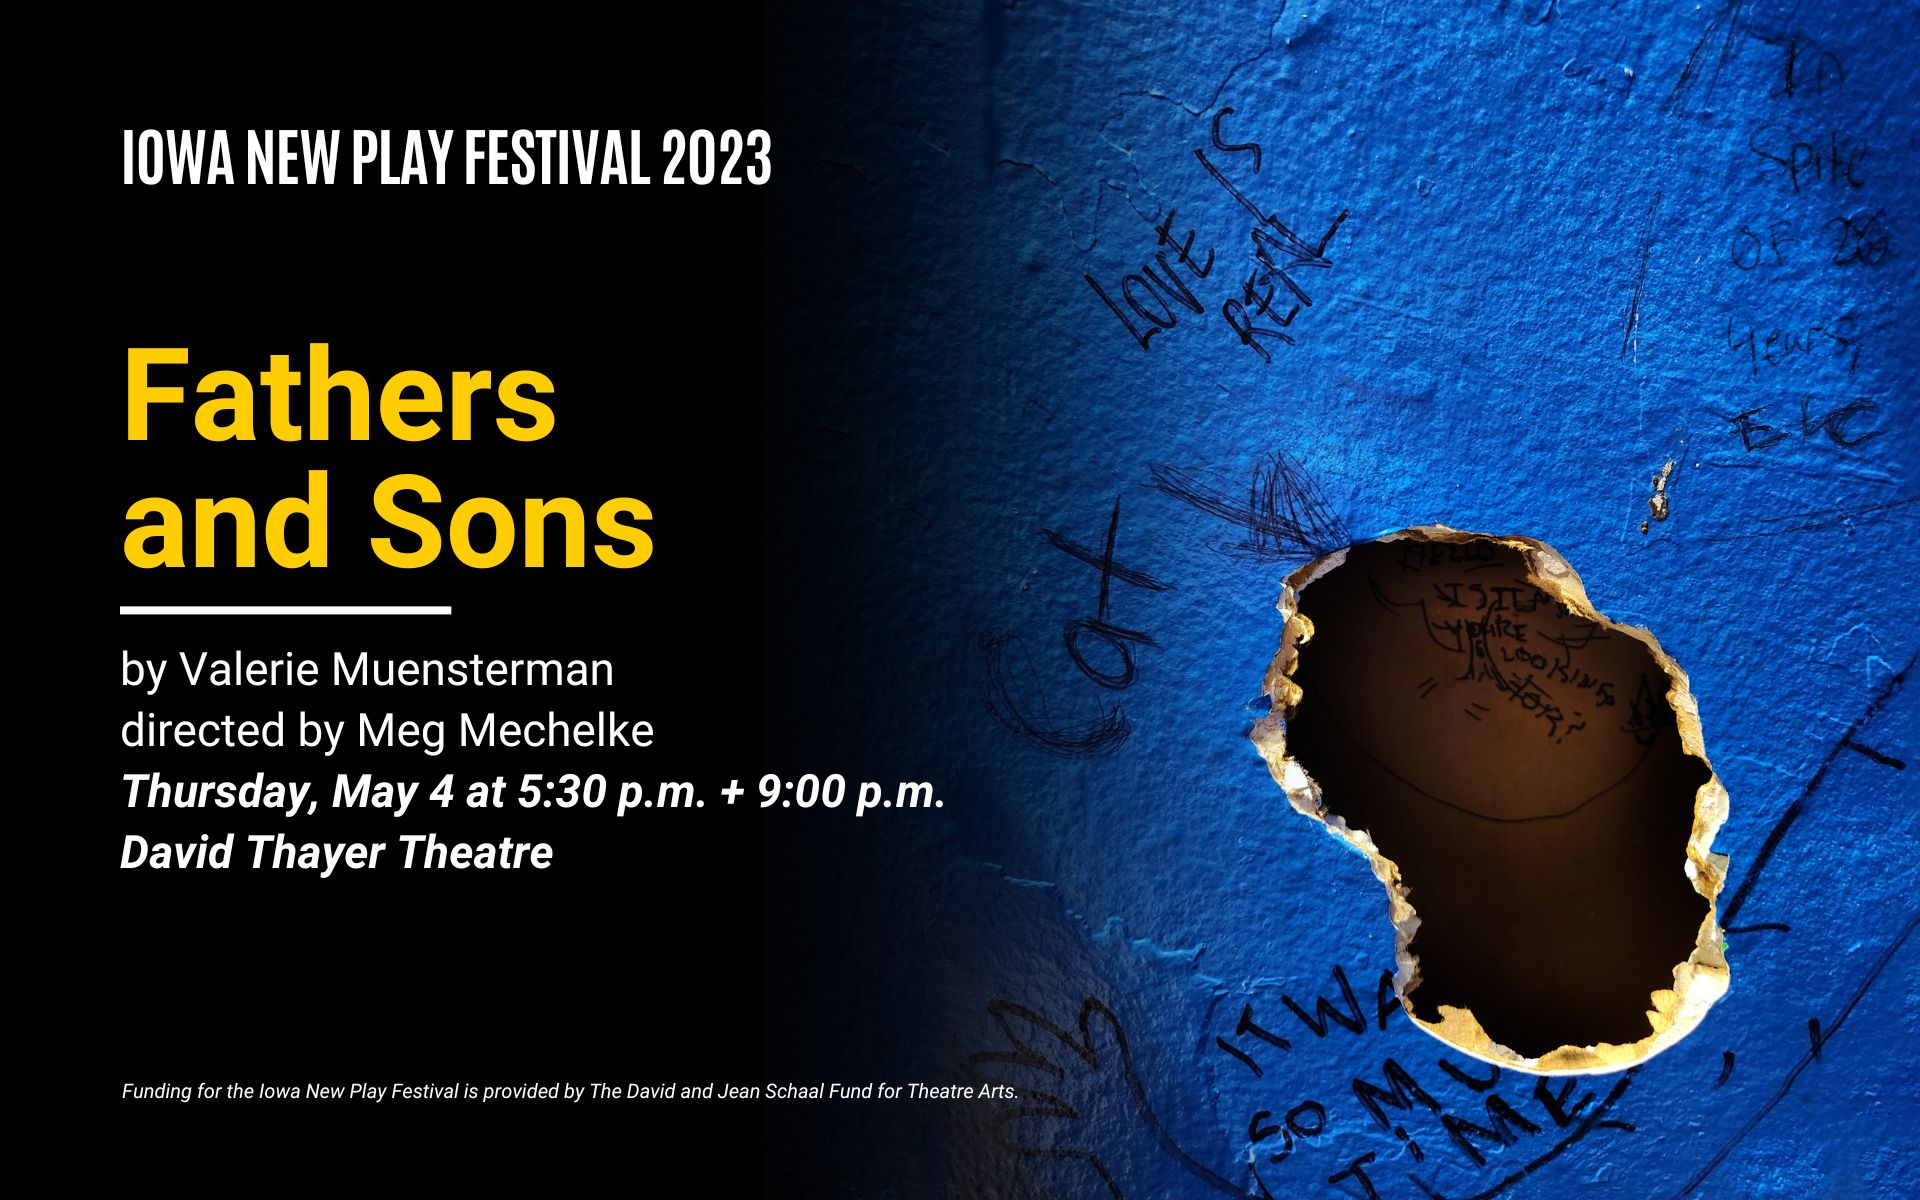 Iowa New Play Festival 2023 - Fathers and Sons